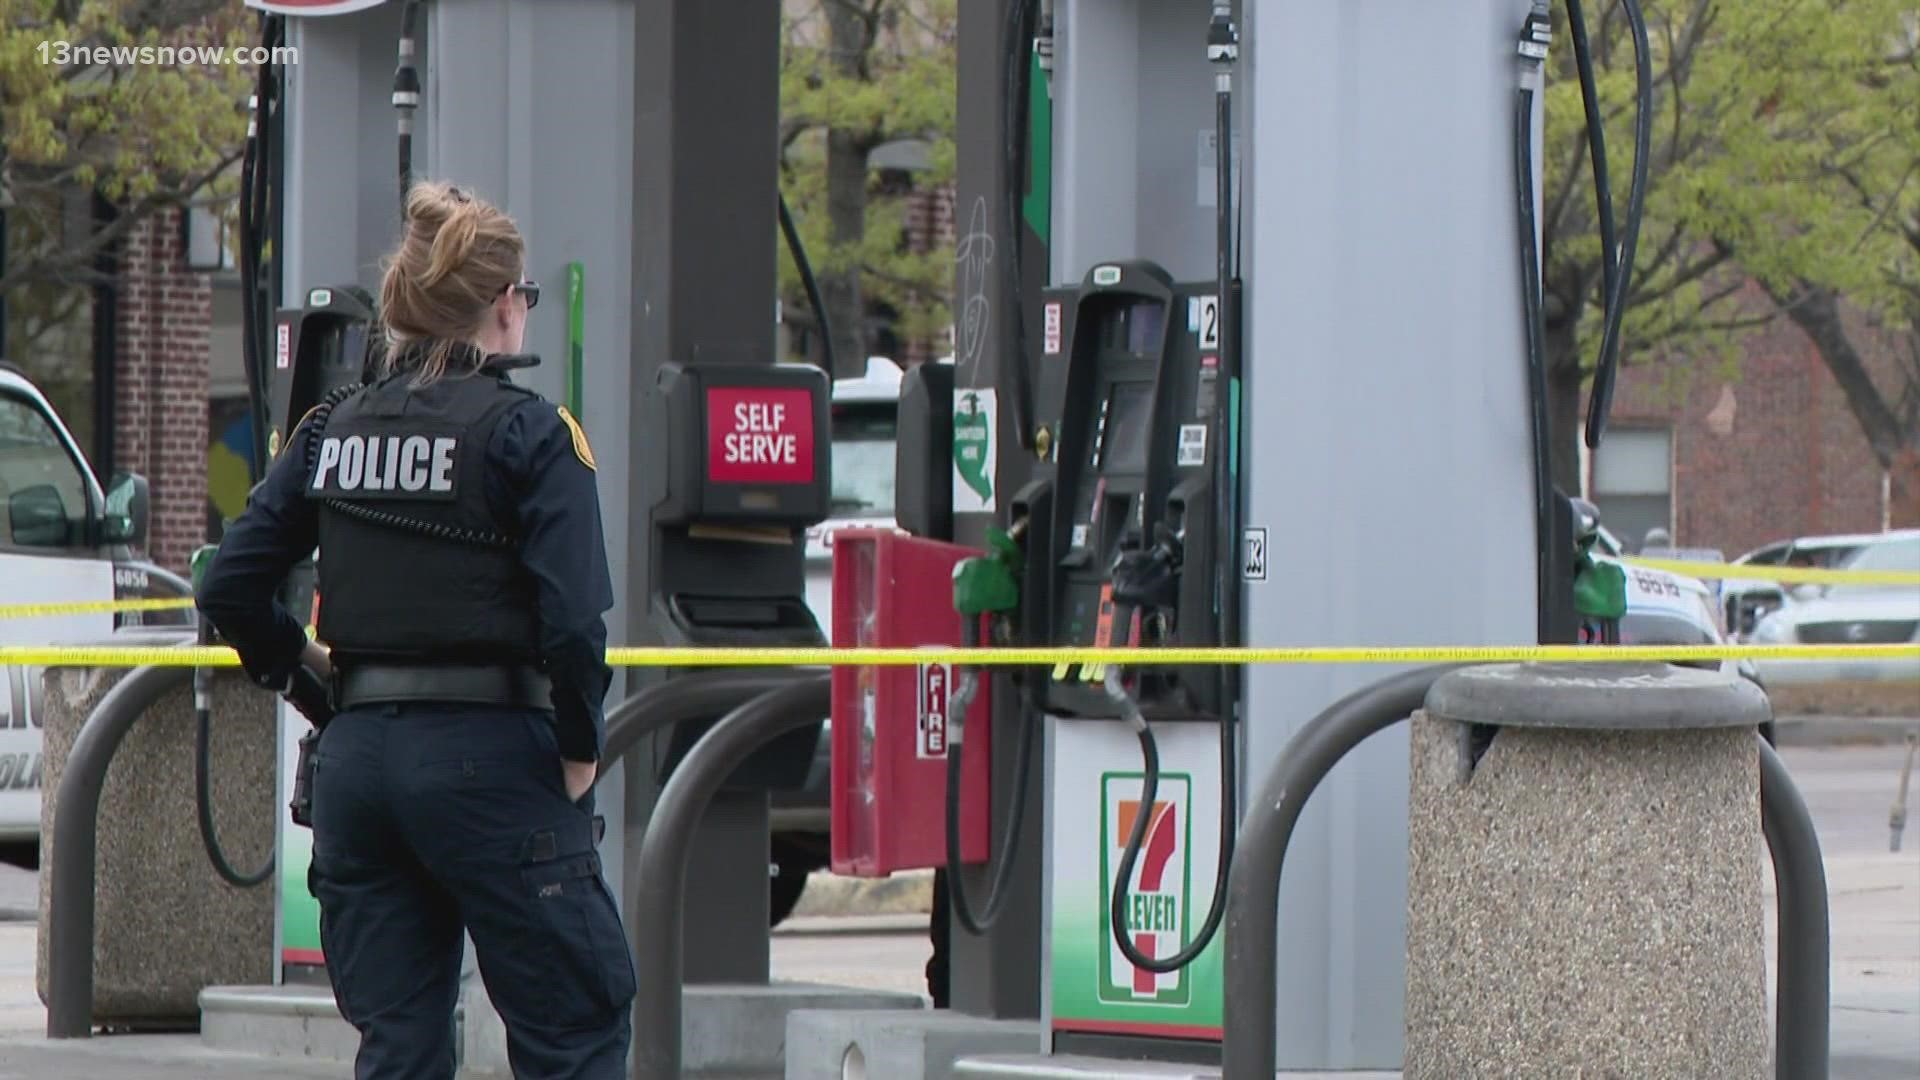 On April 5, police found a man with a gunshot wound to the head at the 7-Eleven at 3800 Granby Street.